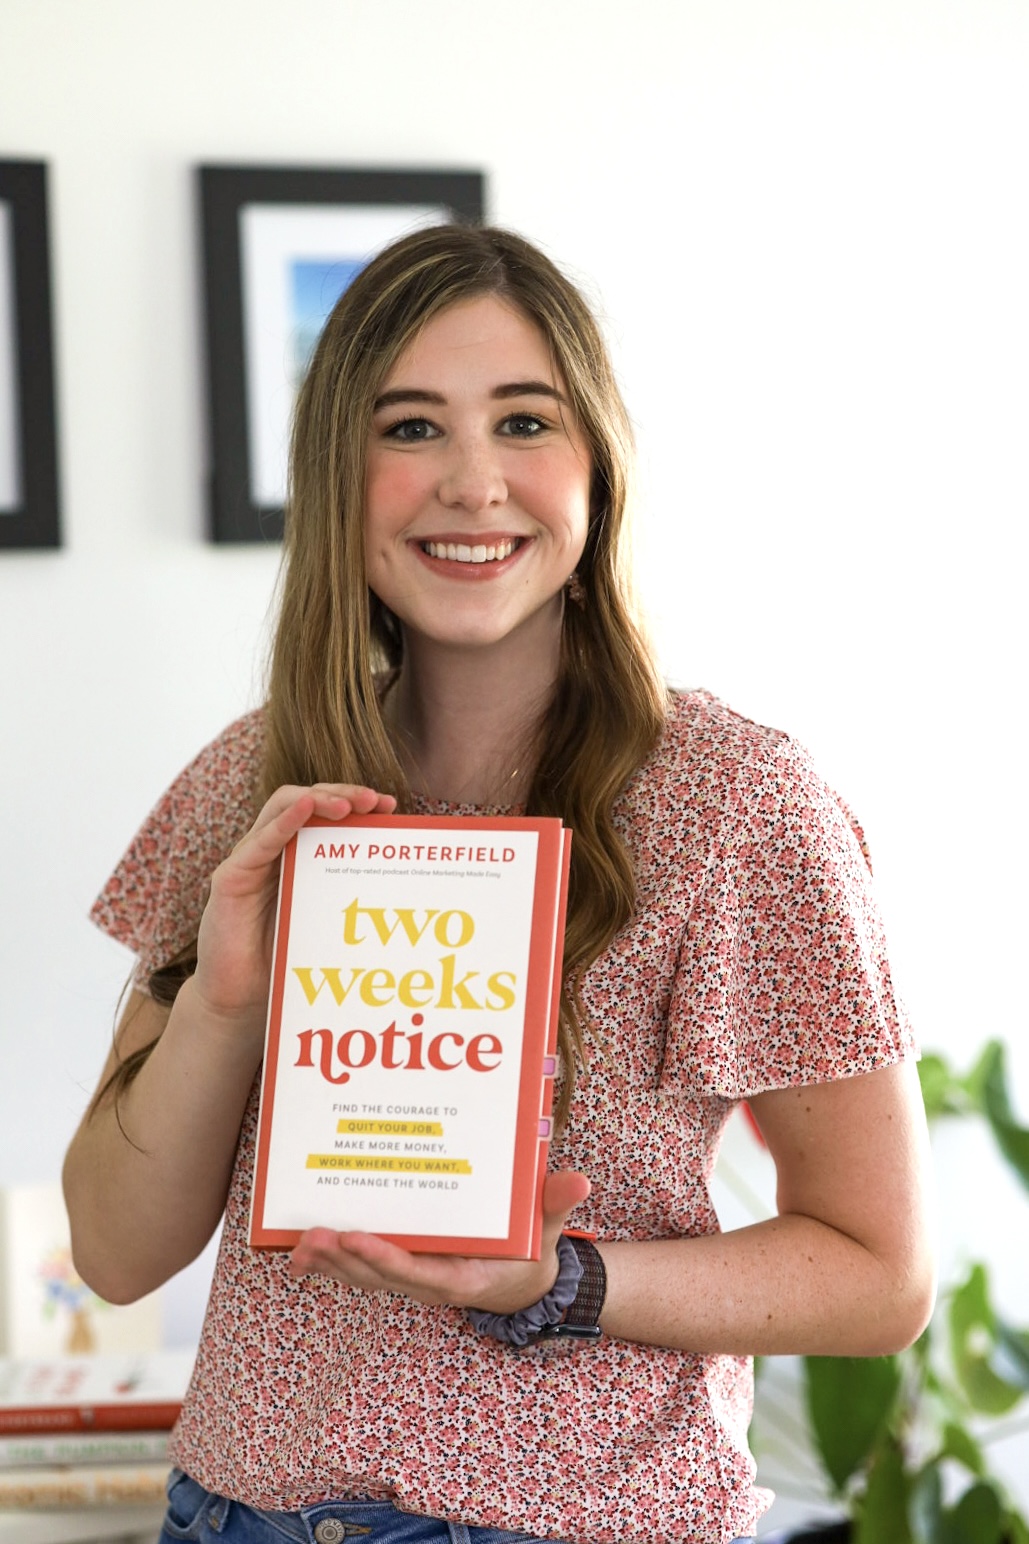 Madelyn Victoria holding Amy Porterfield Two Weeks Notice Book